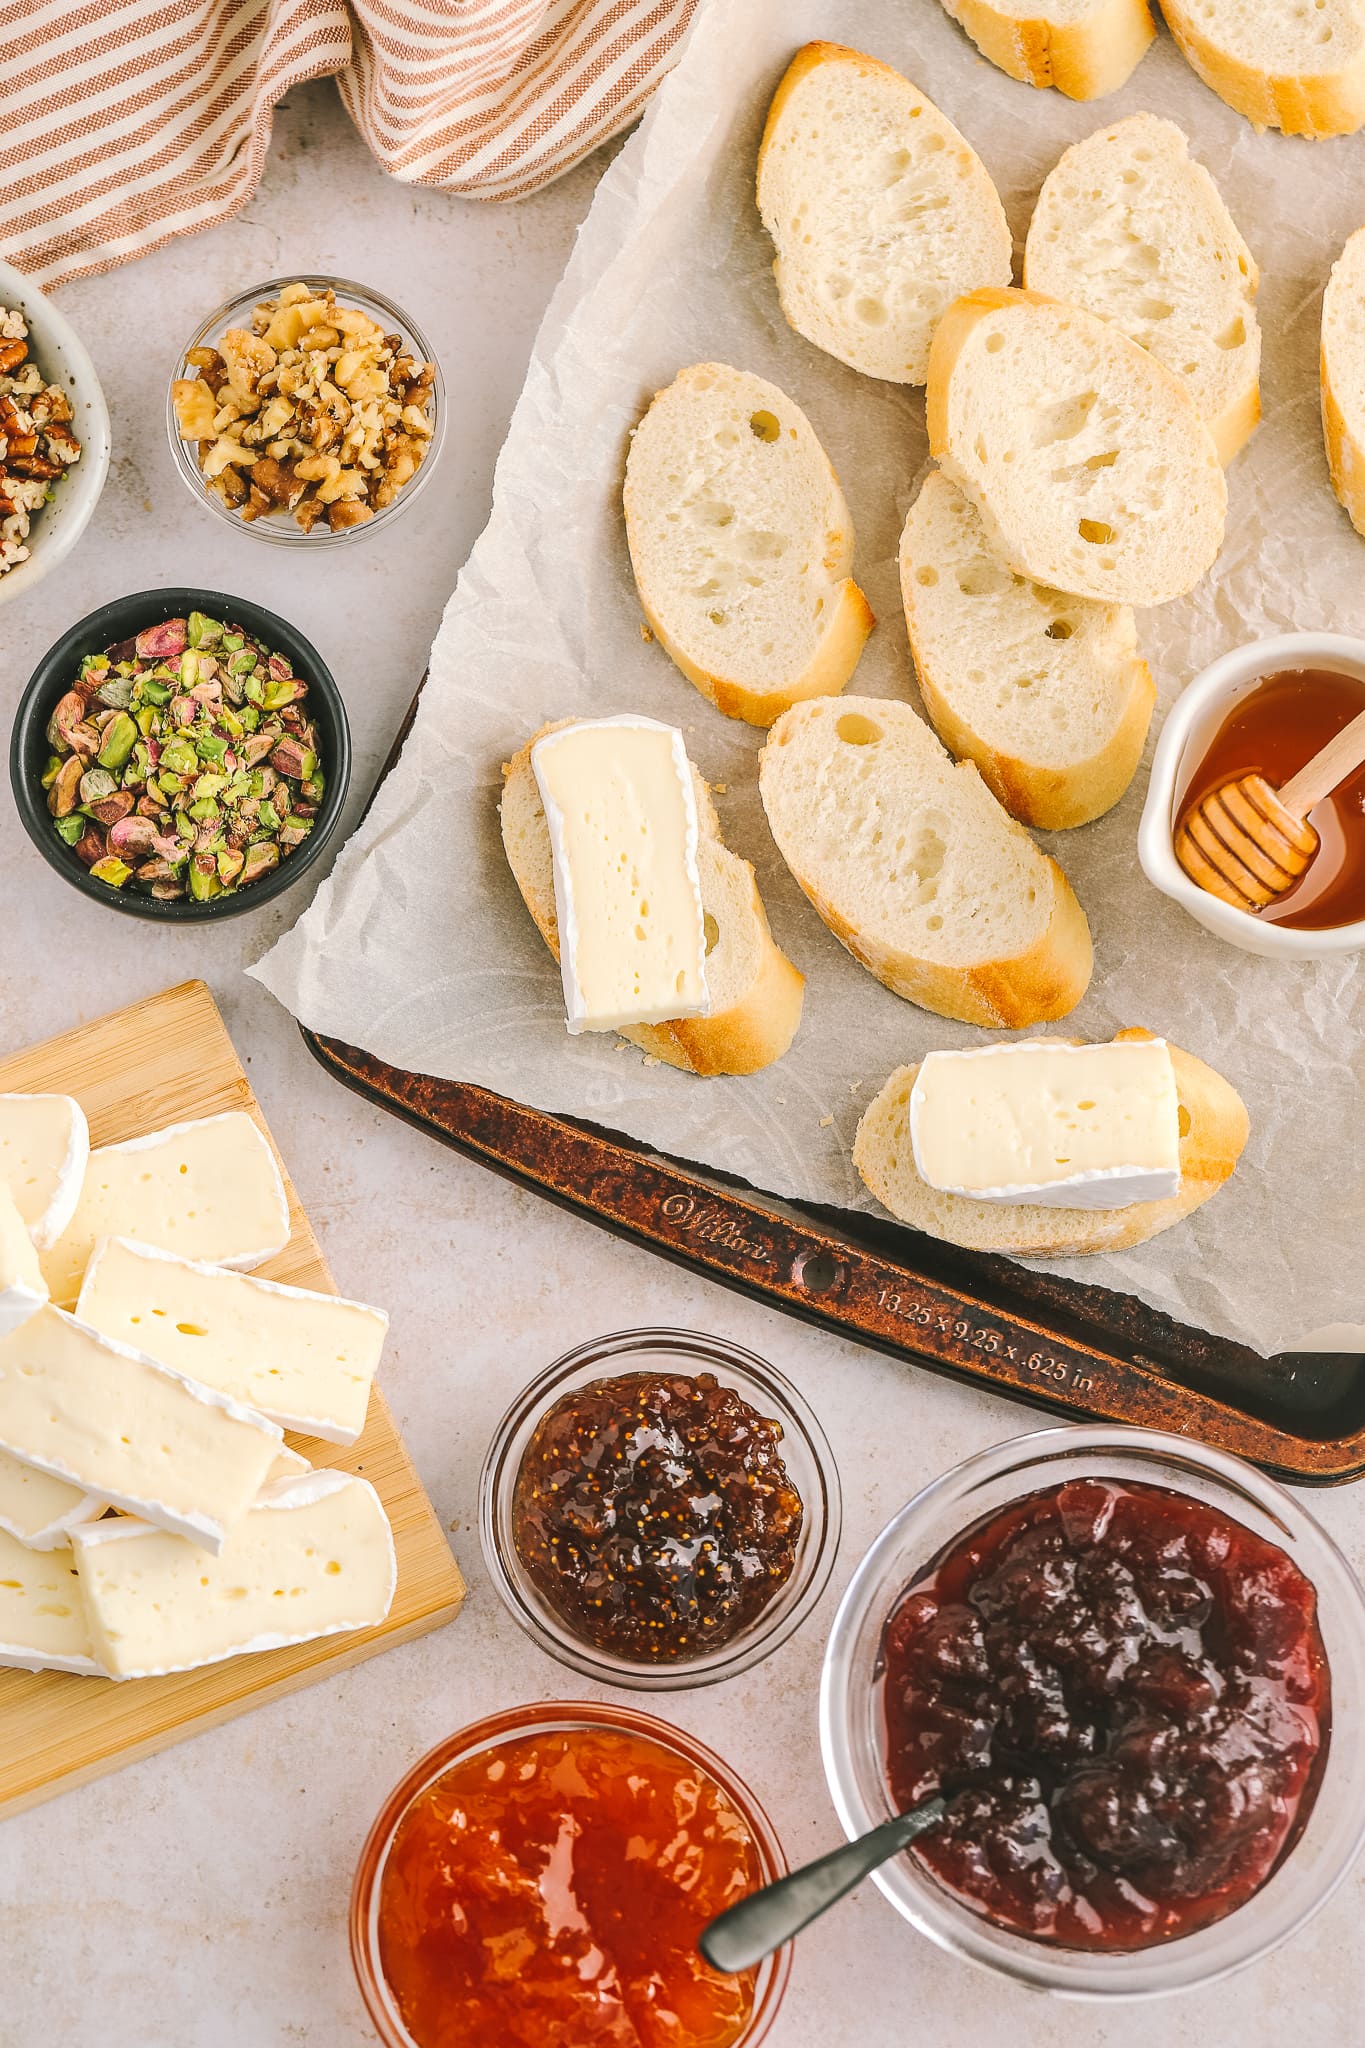 ingredients to make appetizers: brie cheese, baguette, jams and nuts